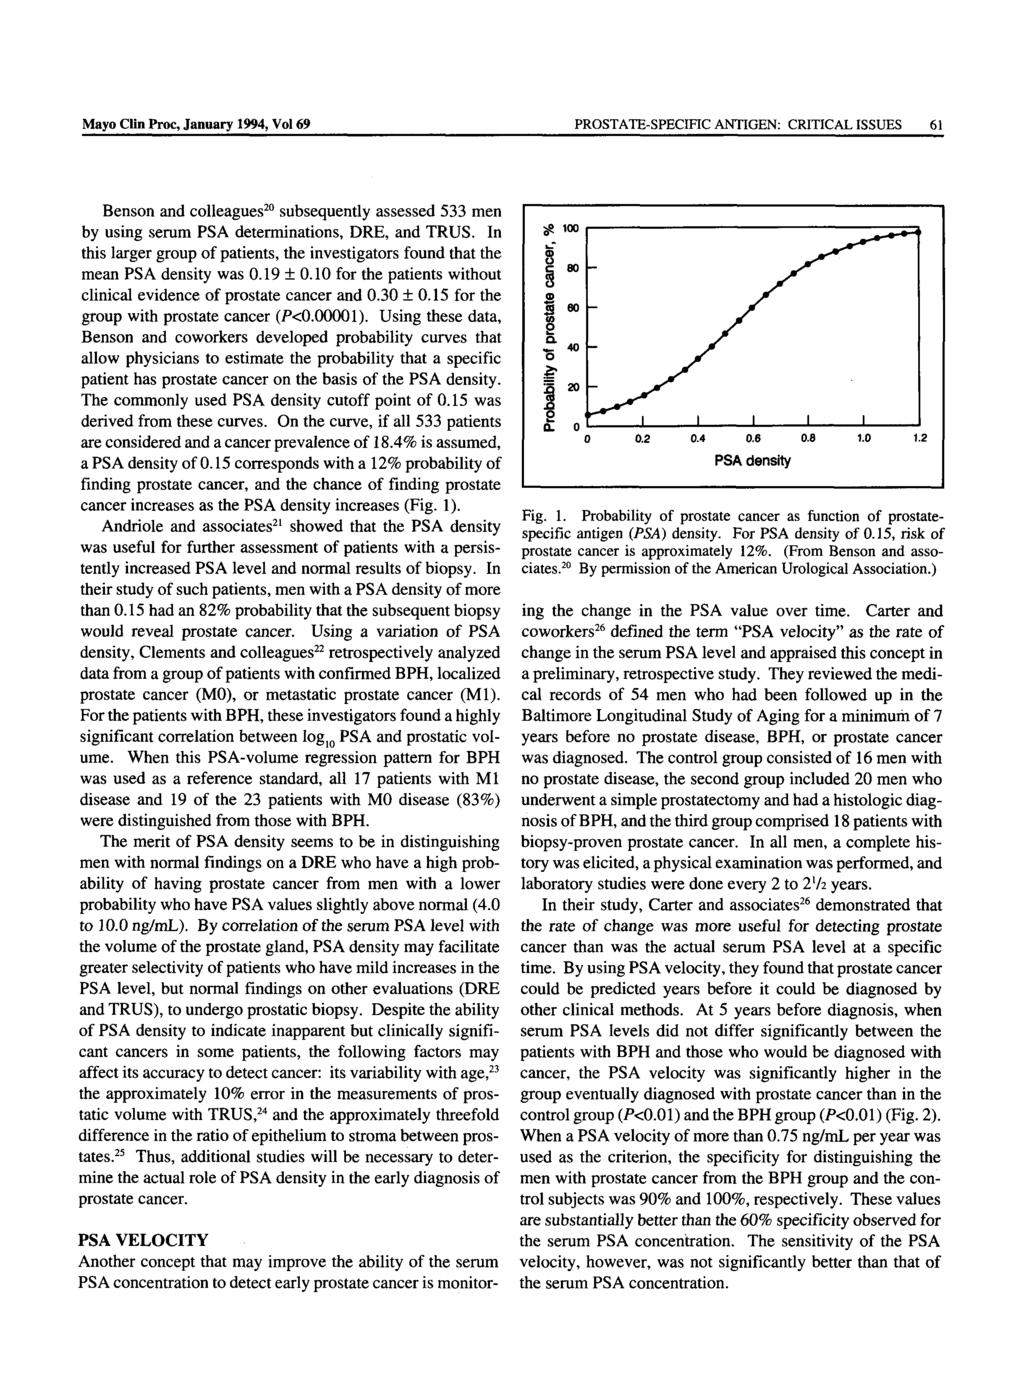 Mayo Clin Proc, January 1994, Vol 69 PROSTATE-SPECIFIC ANTIGEN: CRITICAL ISSUES 61 Benson and colleagues 20 subsequently assessed 533 men by using serum PSA determinations, DRE, and TRUS.